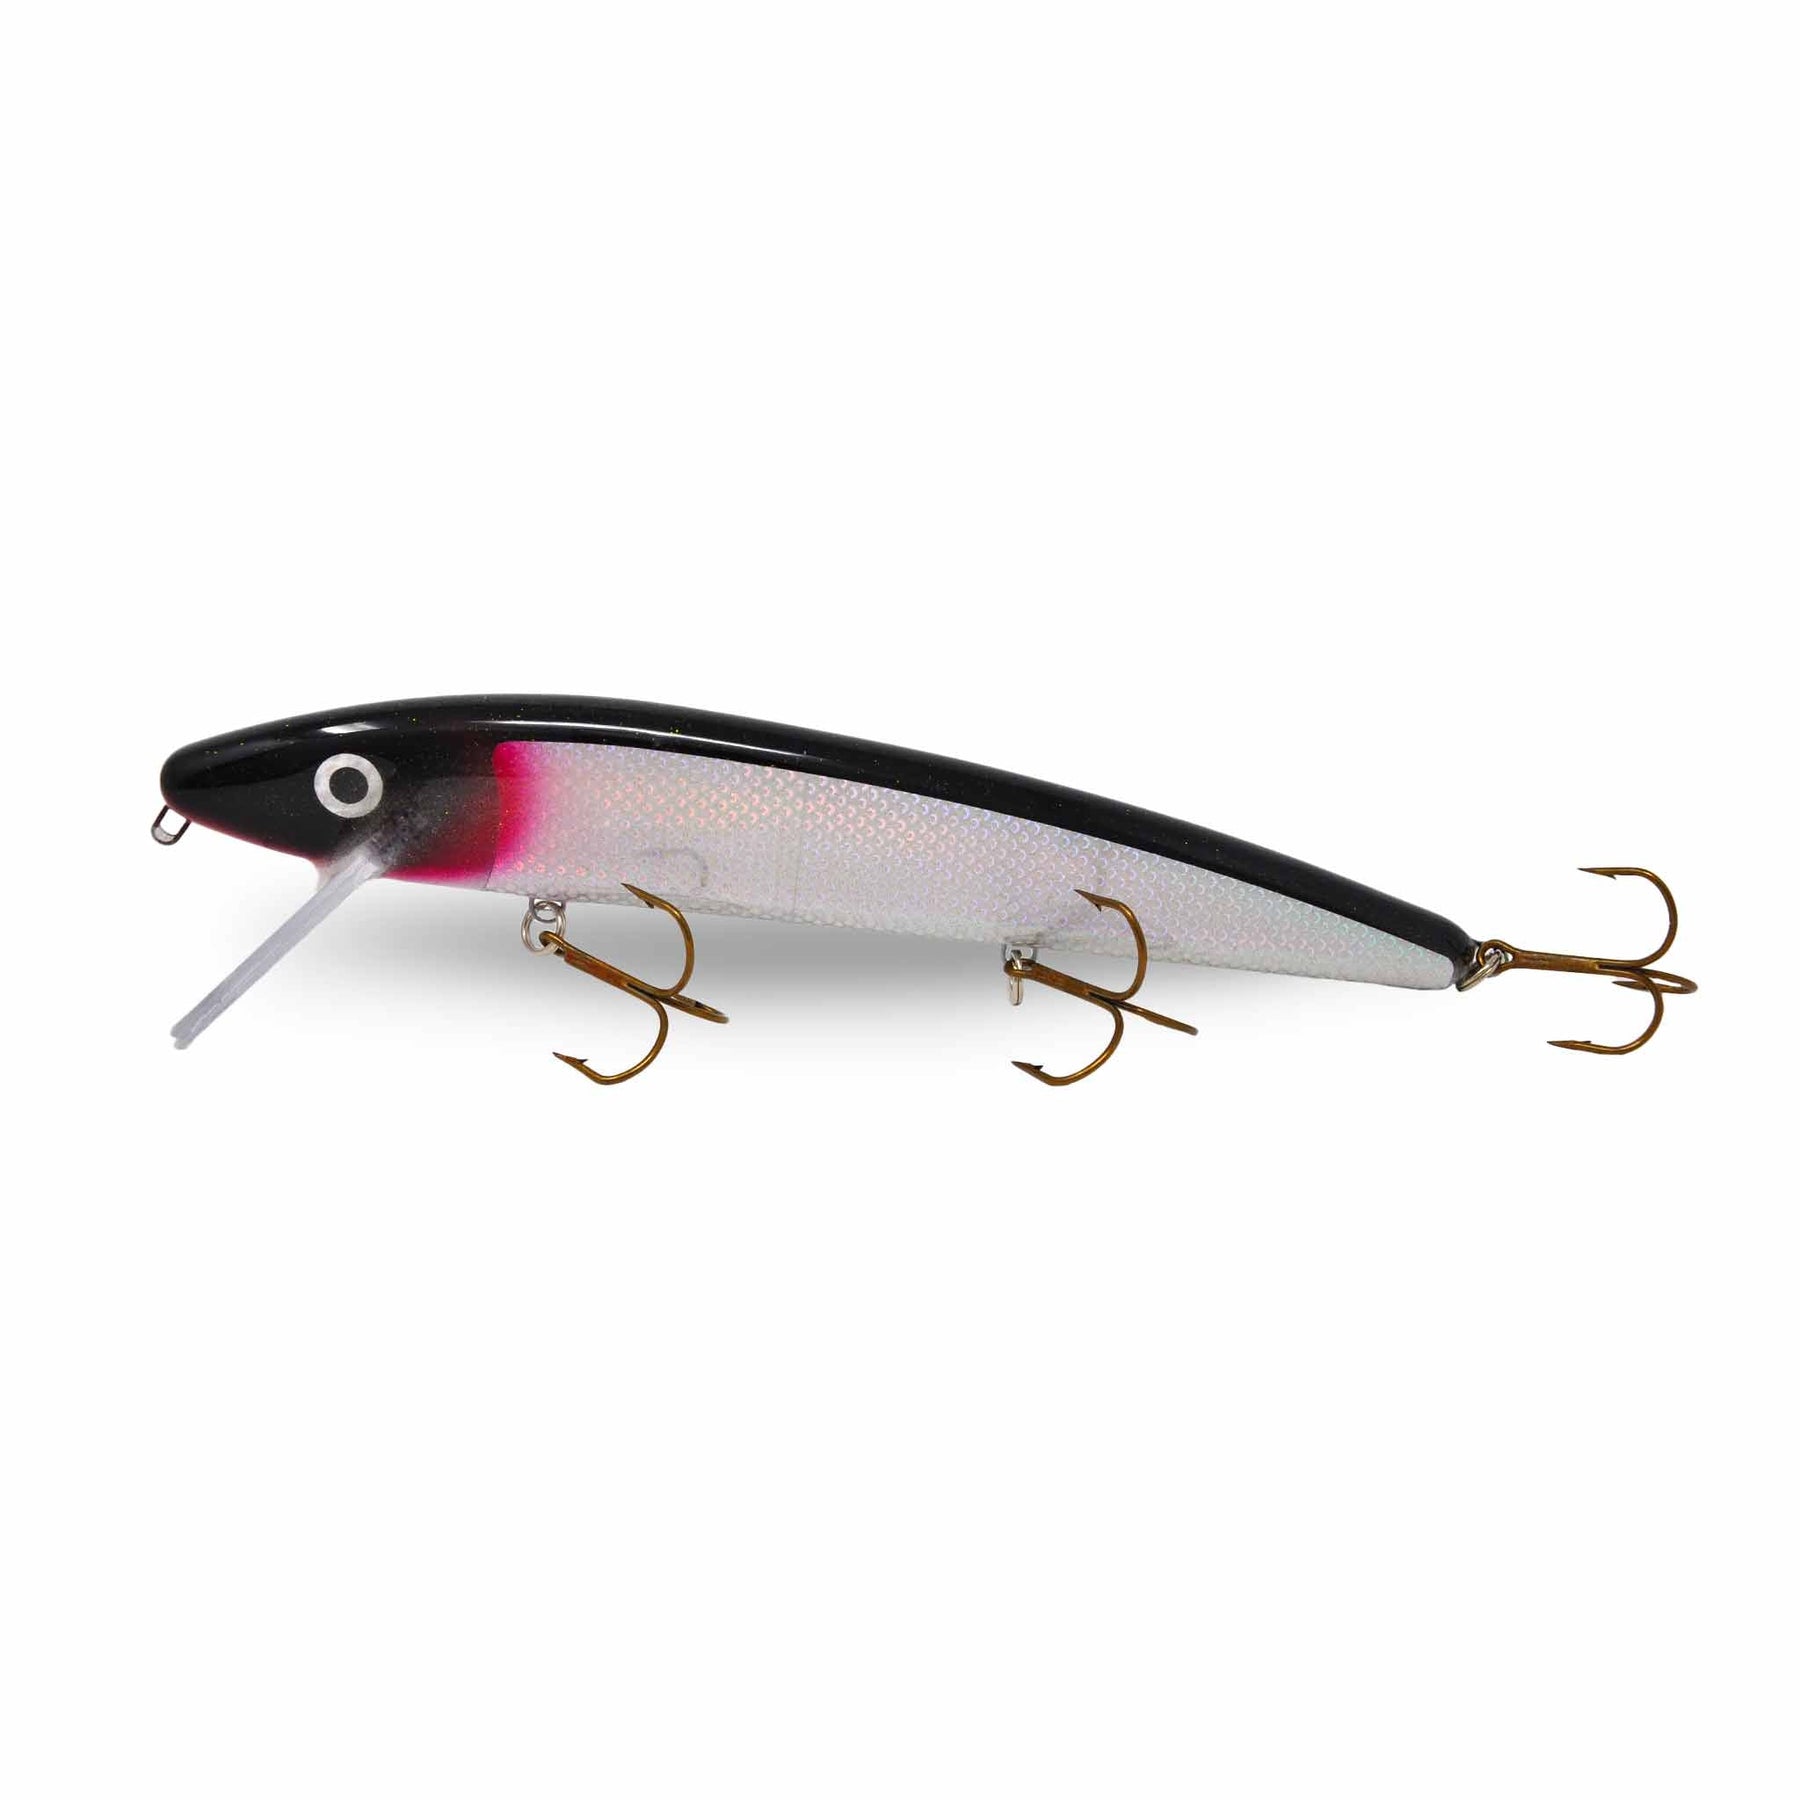 View of Crankbaits Slammer 10" Minnow Crankbait Prism Shiner available at EZOKO Pike and Musky Shop